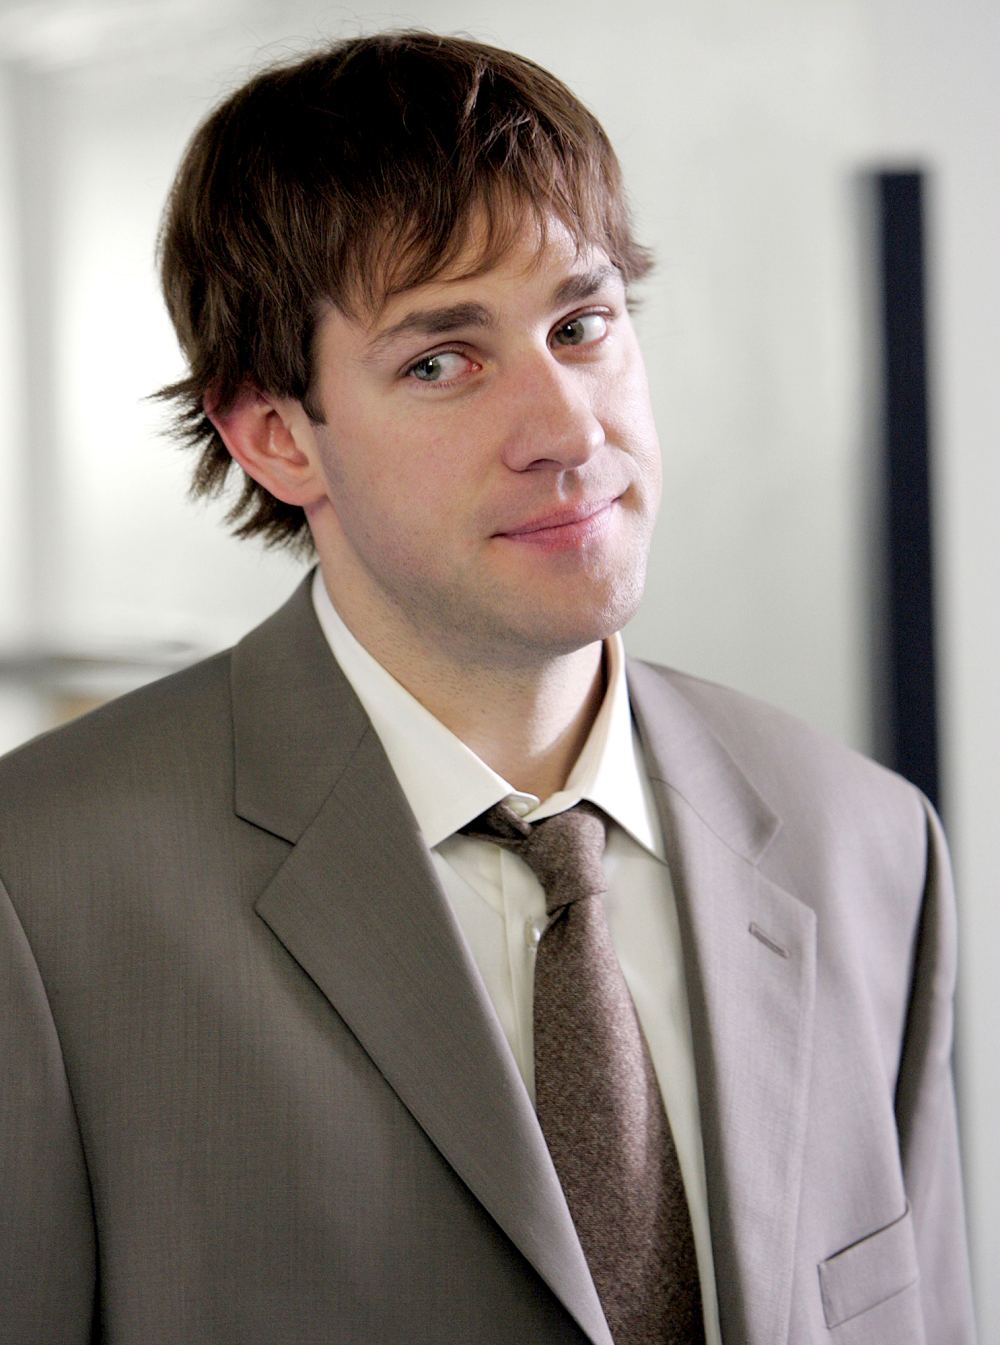 John Krasinski teases 'The Office' reunion in 'IF,' about imaginary friends